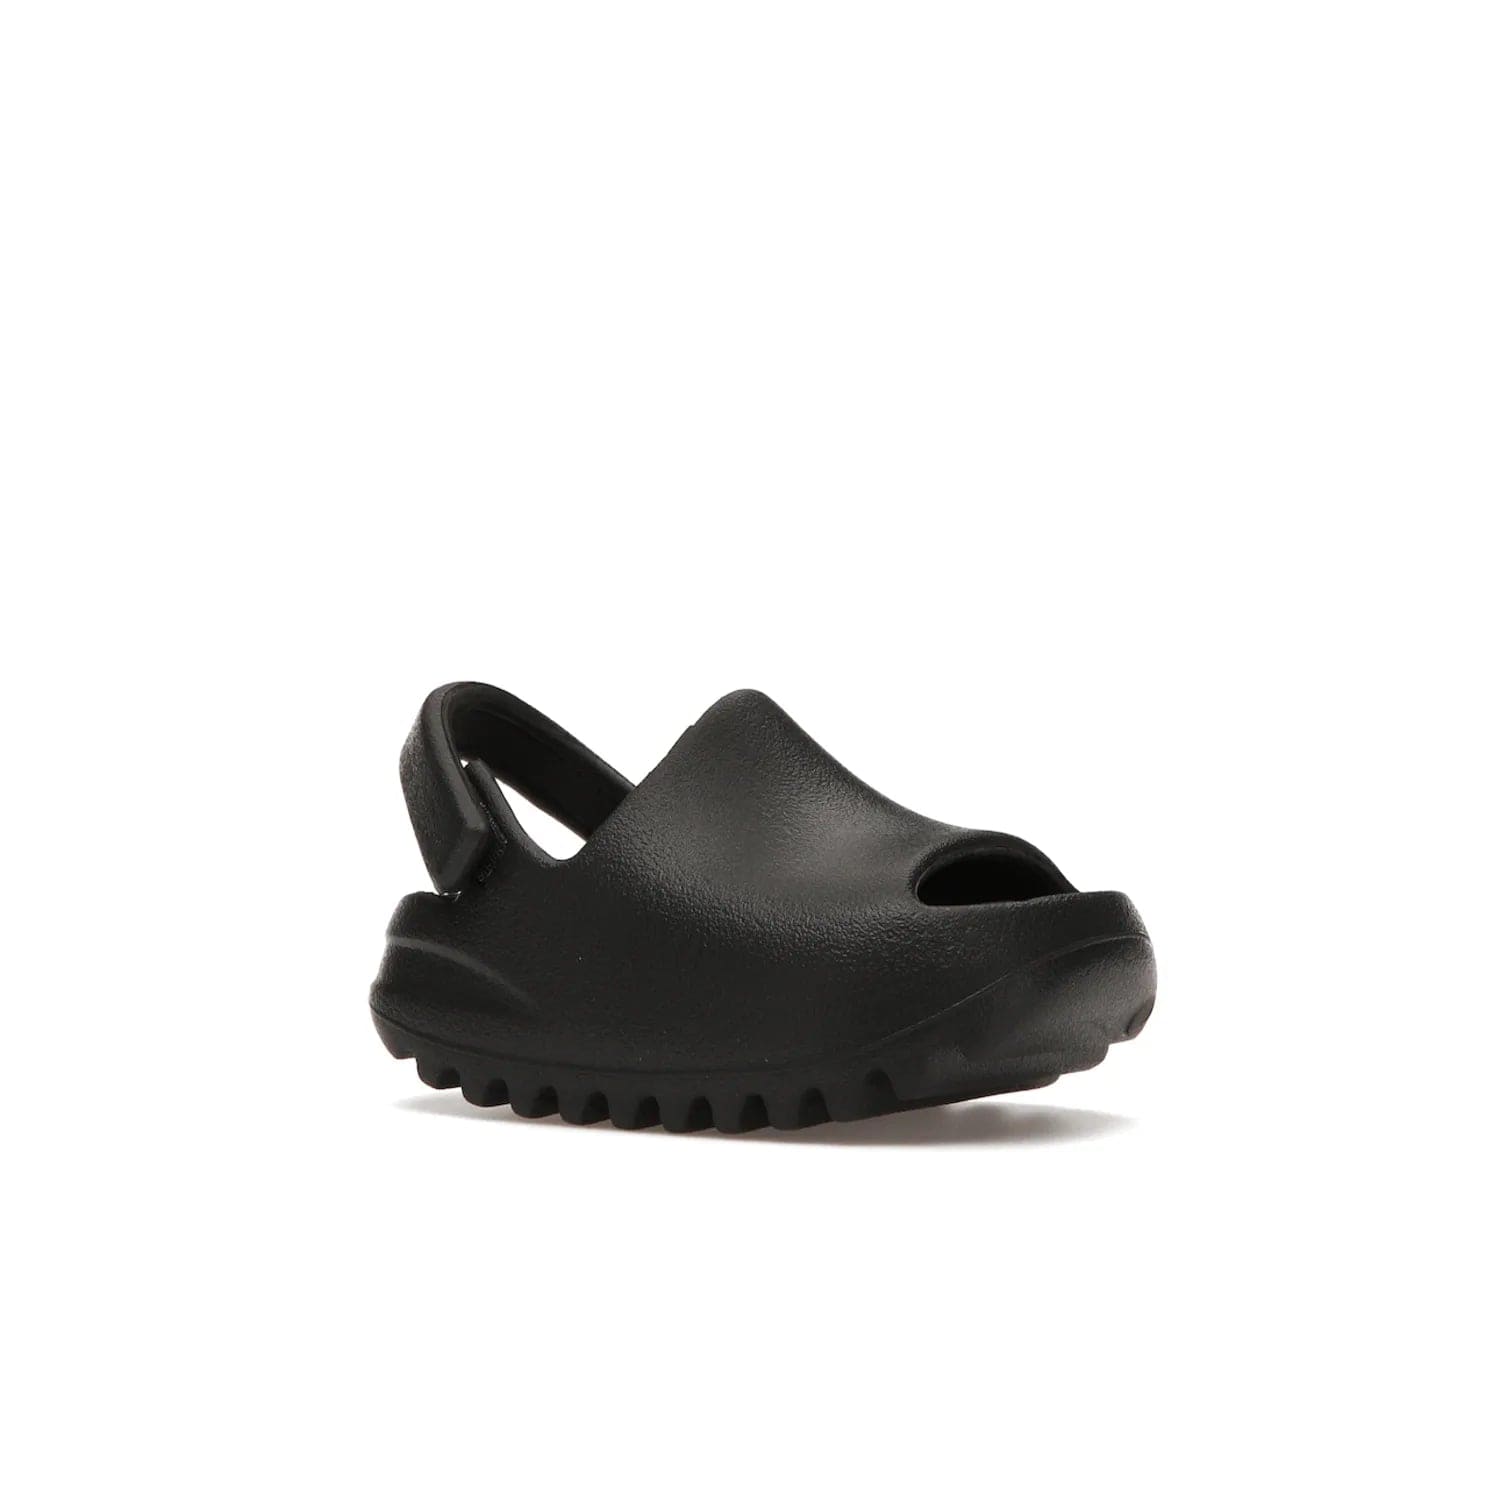 adidas Yeezy Slide Onyx (Infants) - Image 4 - Only at www.BallersClubKickz.com - The Adidas Yeezy Slide Onyx (Infant) is a classic silhouette with unique features and durable EVA foam. Released in May 2021 with a starting price of $70, it's no wonder it quickly gained popularity with its cool, minimalist look.